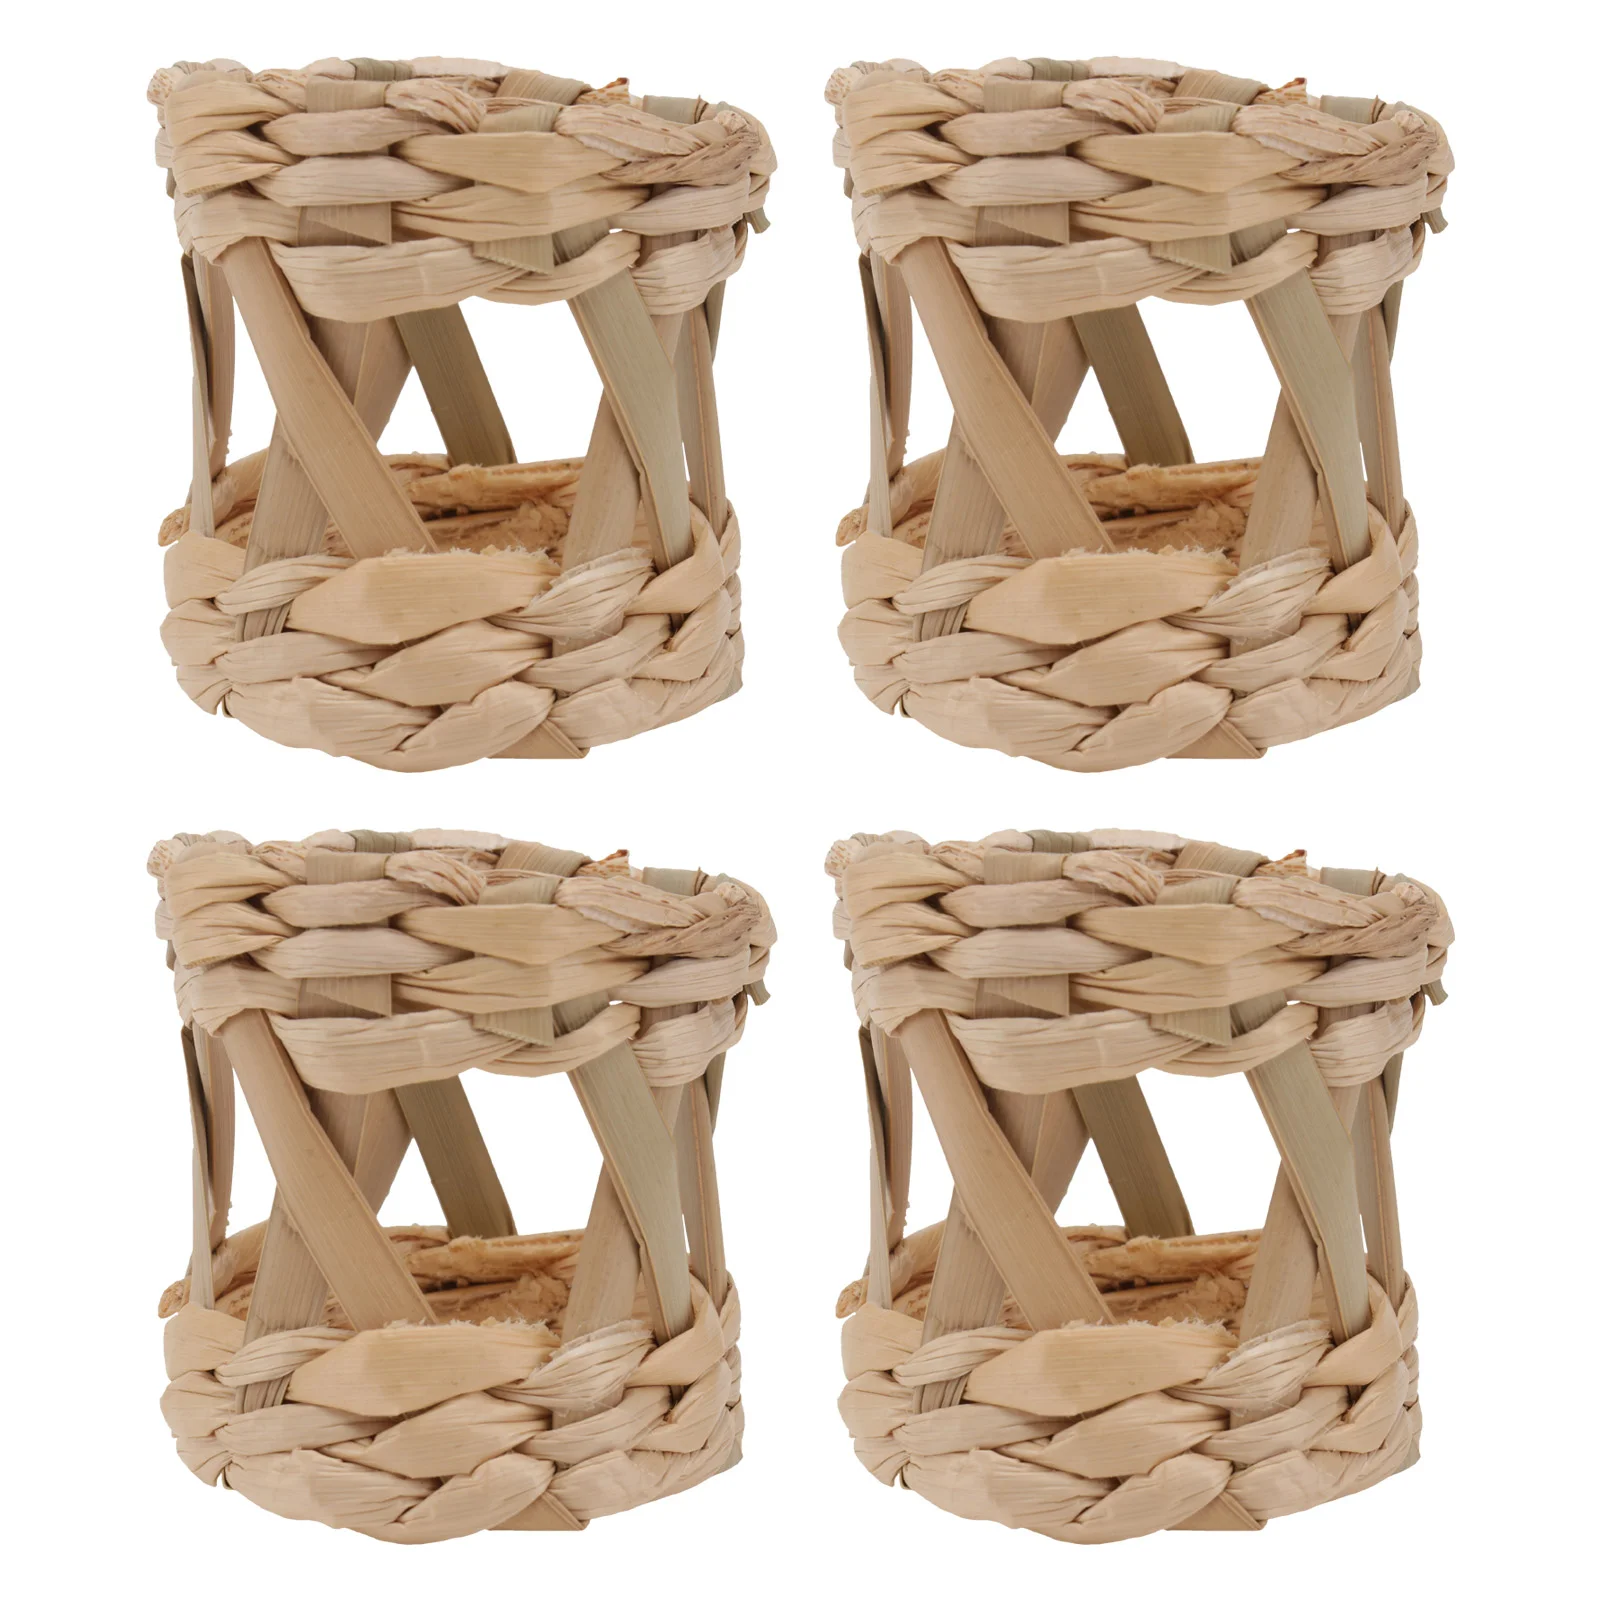 

Napkin Ring Rings Buckle Serviette Wedding Holder Decorative Holders Dinner Party Dining Straw Wicker Table Wrap Rattan Seagrass